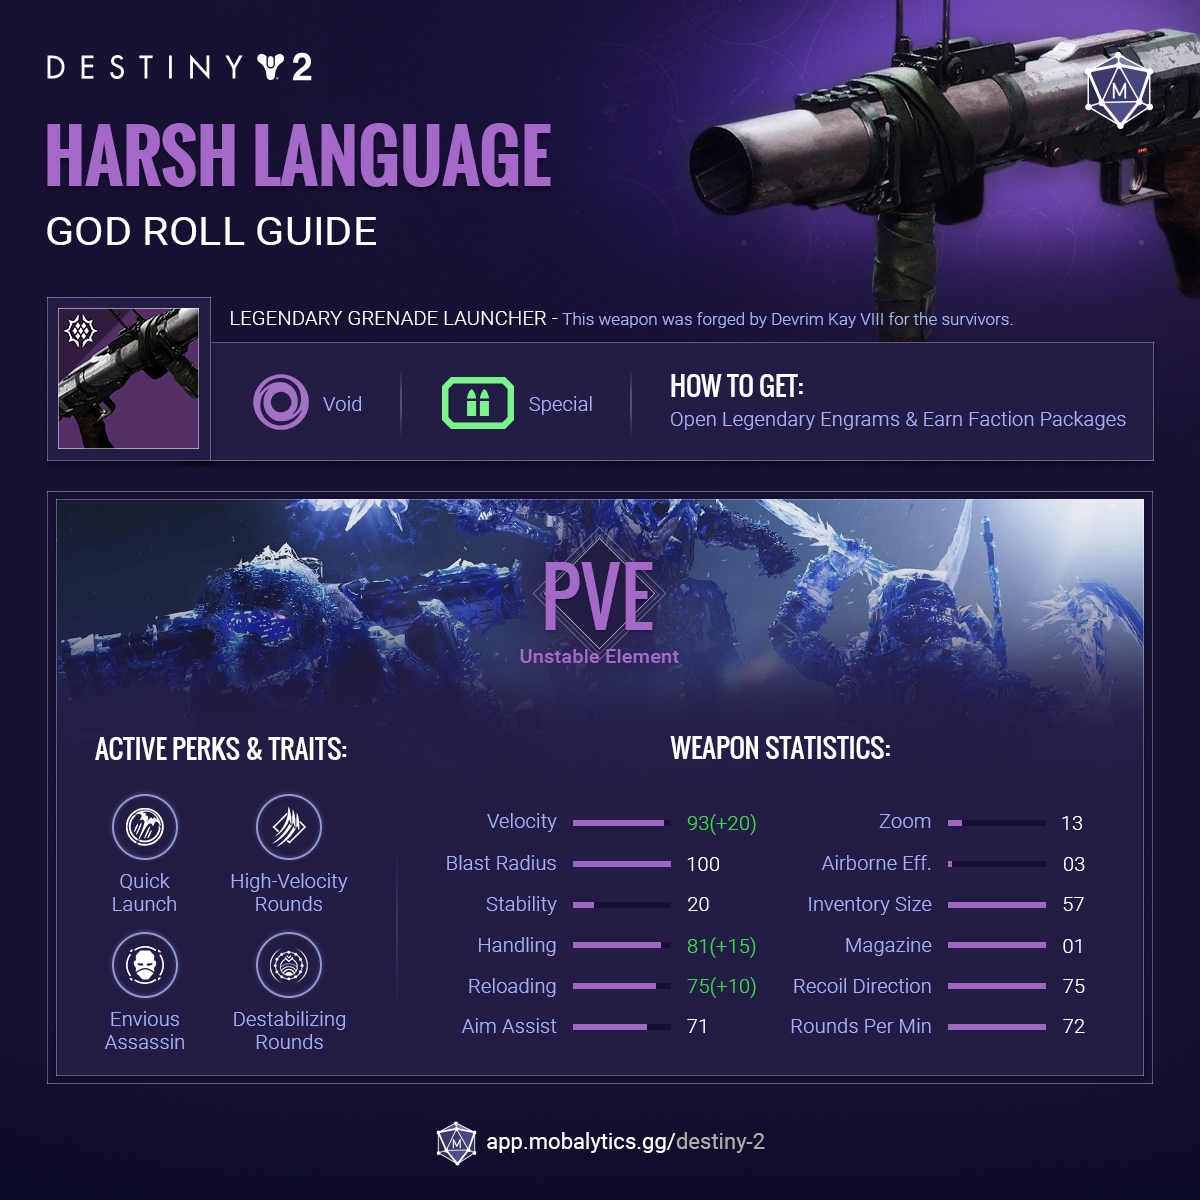 Harsh Language God Roll Guide – Infographic